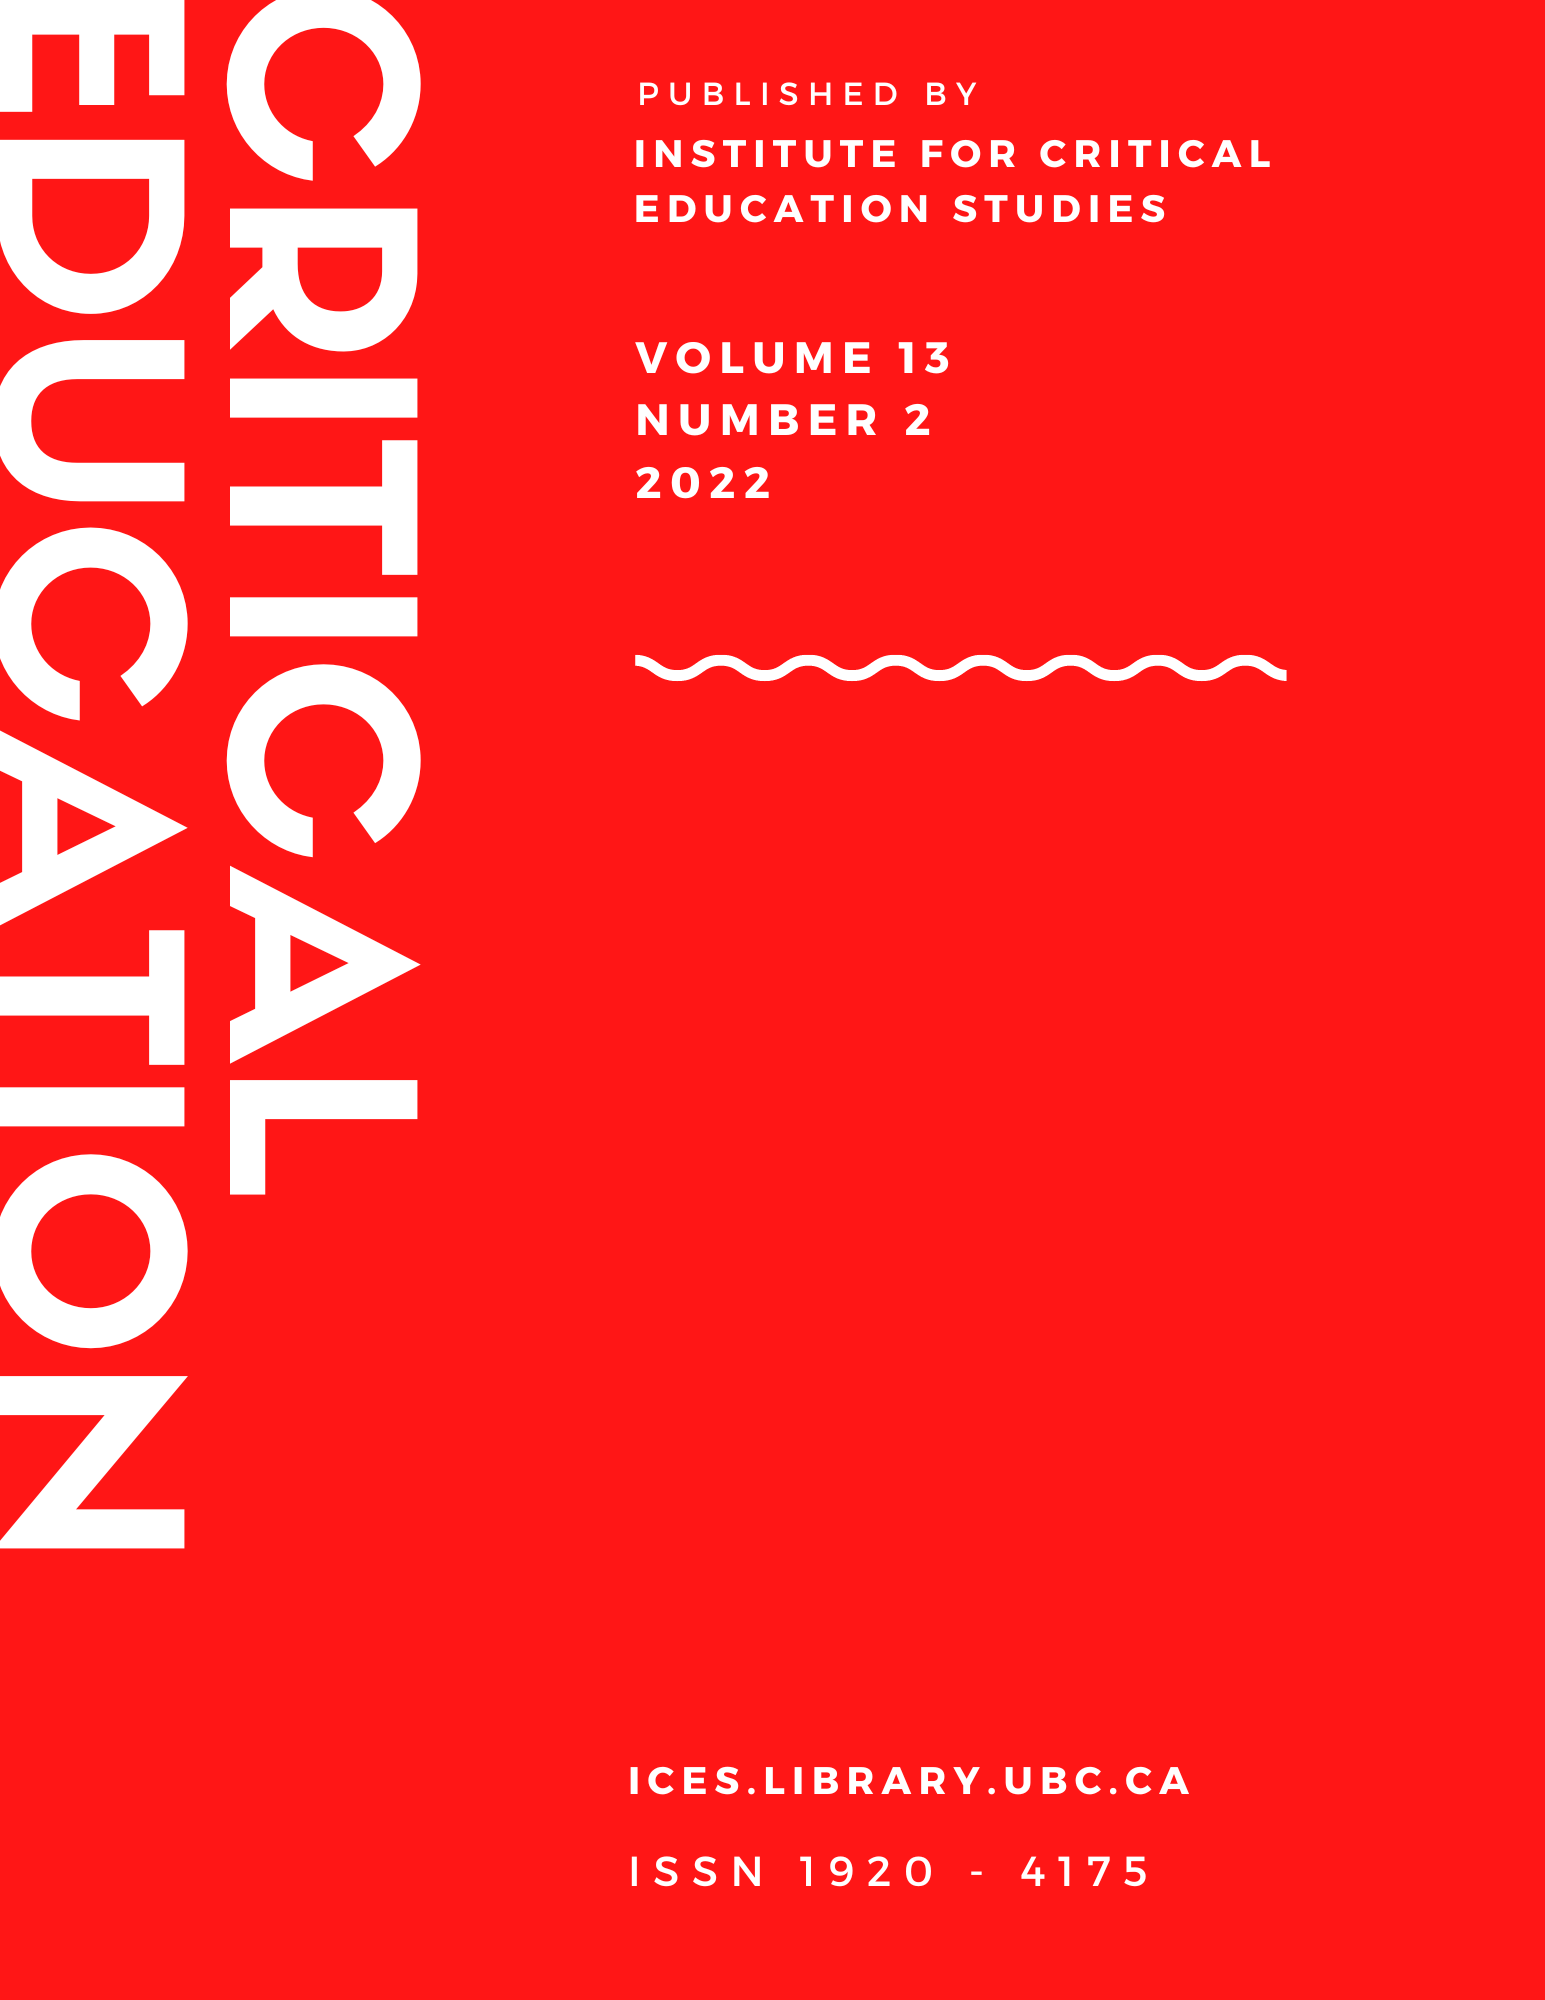 Critical Education Volume 13 Number 2 2022